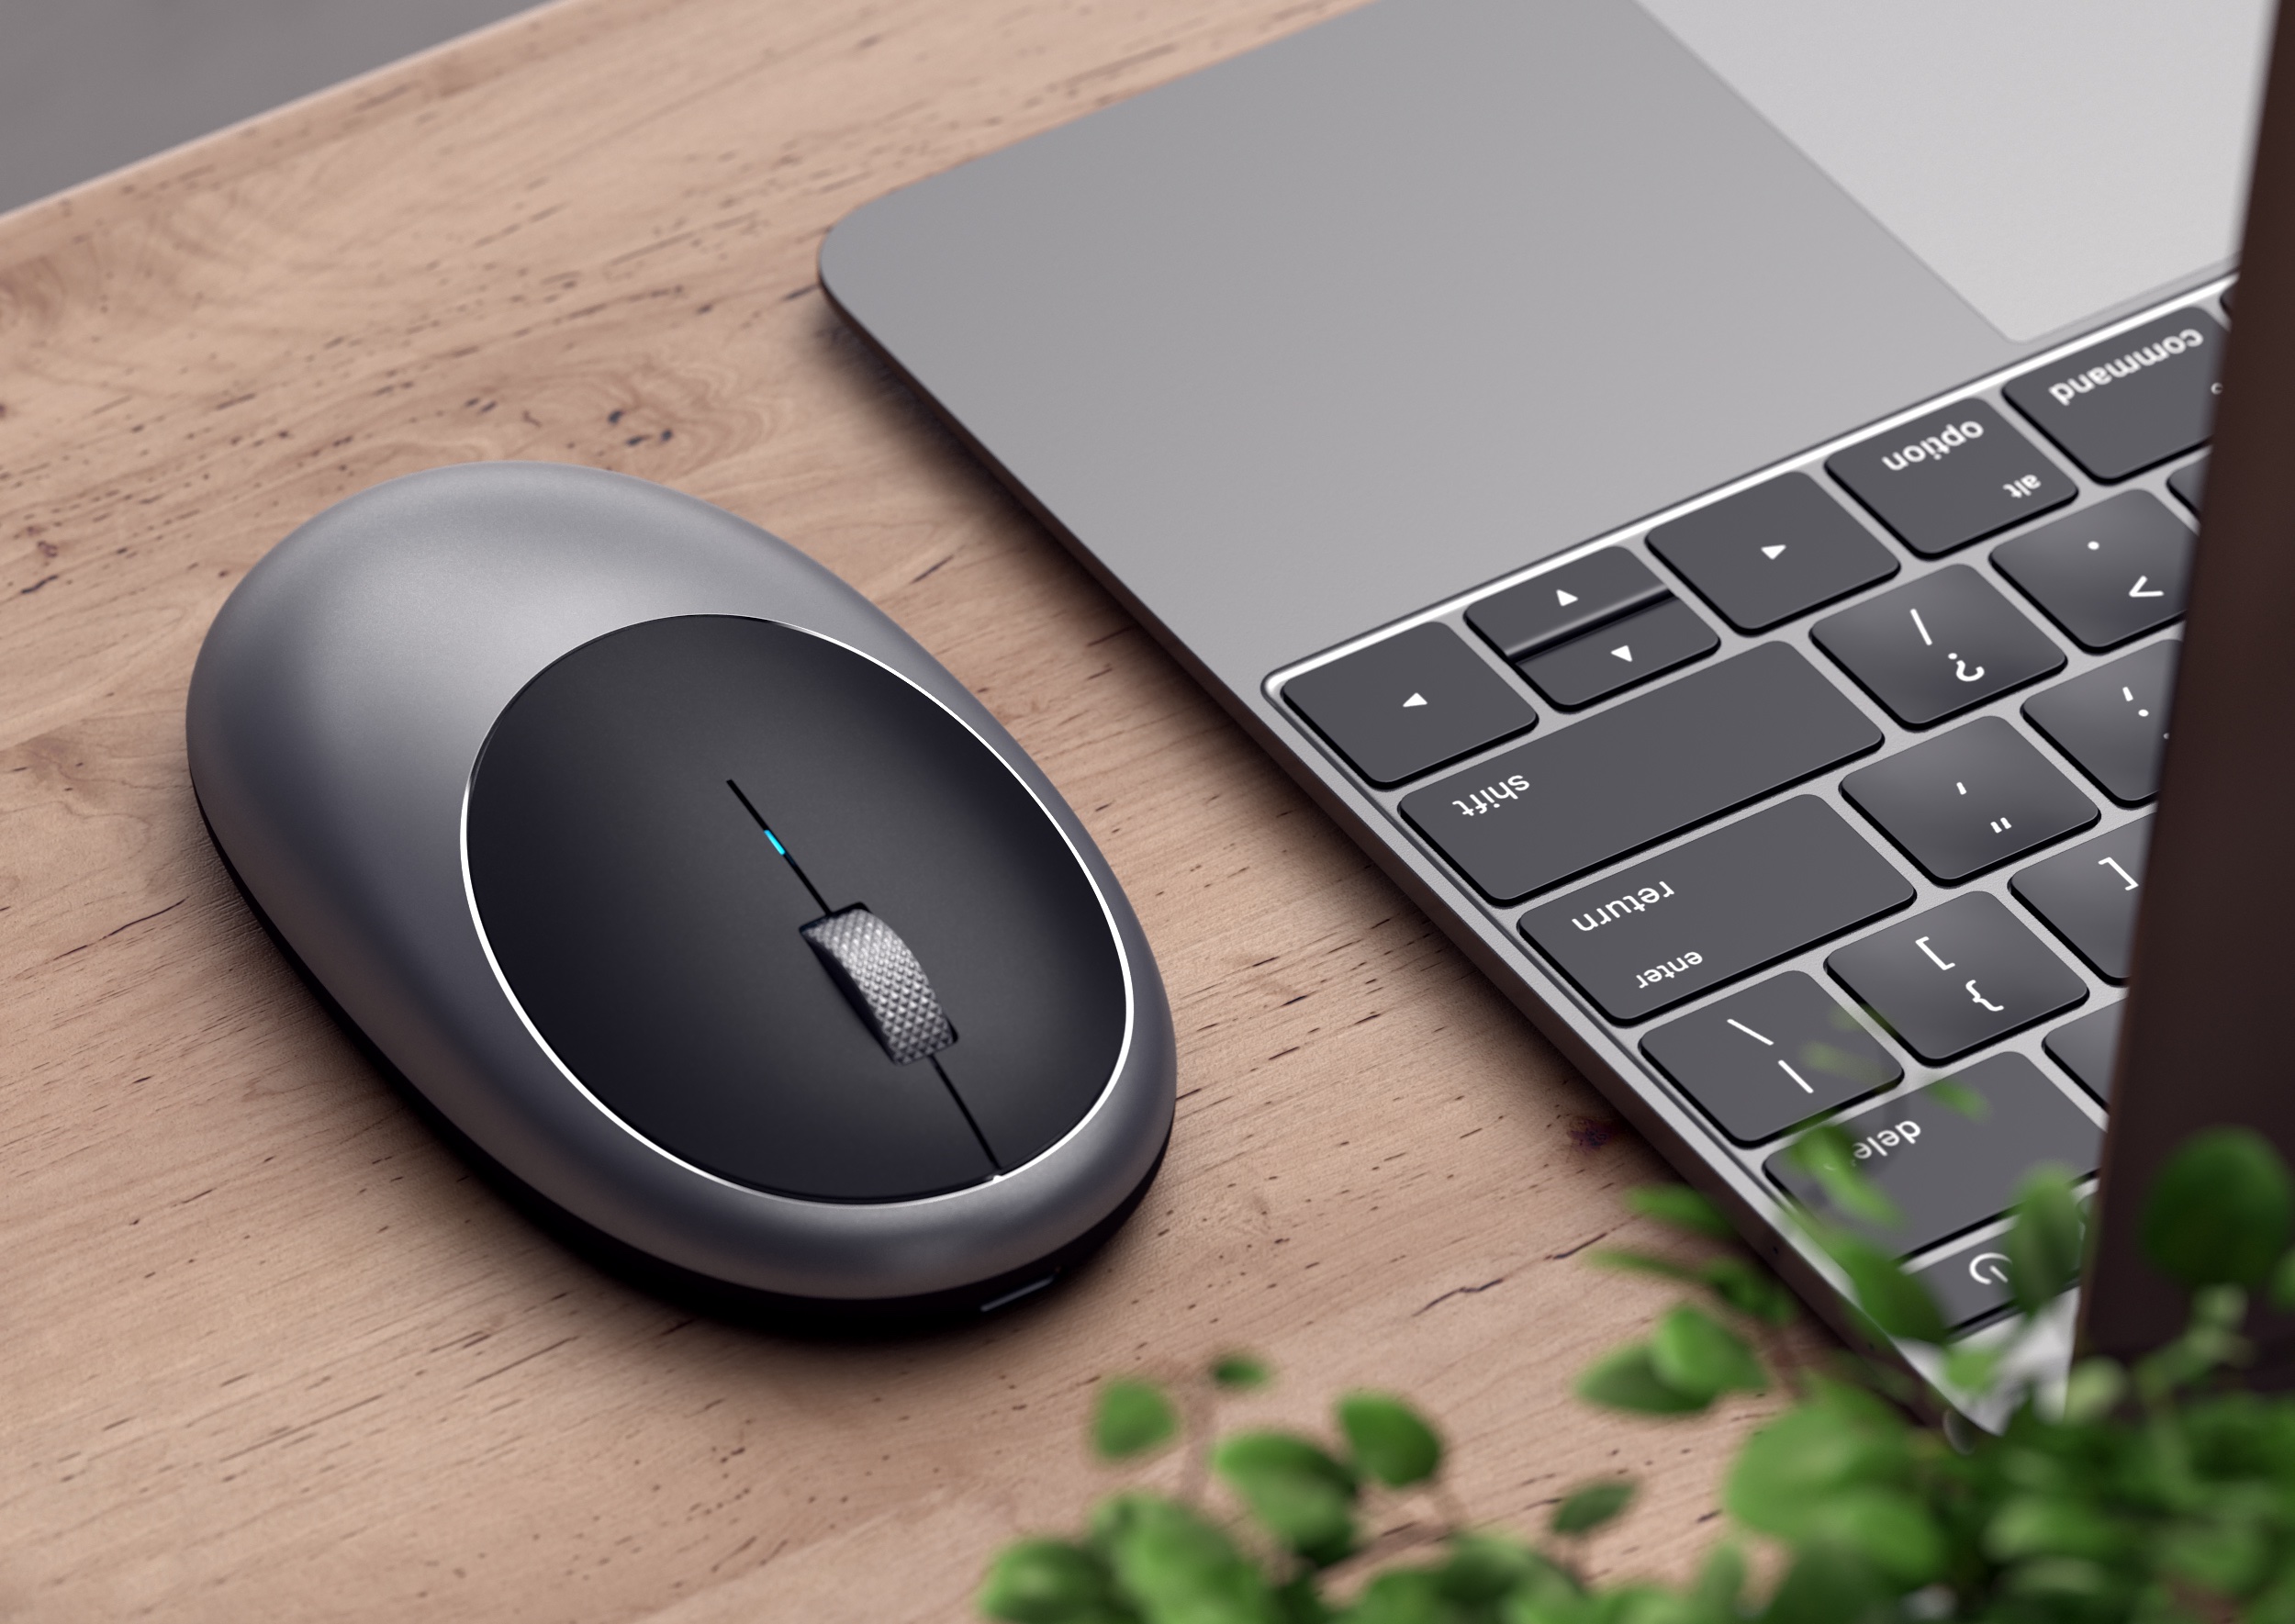 Solformørkelse Motivere Nogen som helst Satechi unveils a wireless mouse with USB-C charging along with a stylish  desk pad